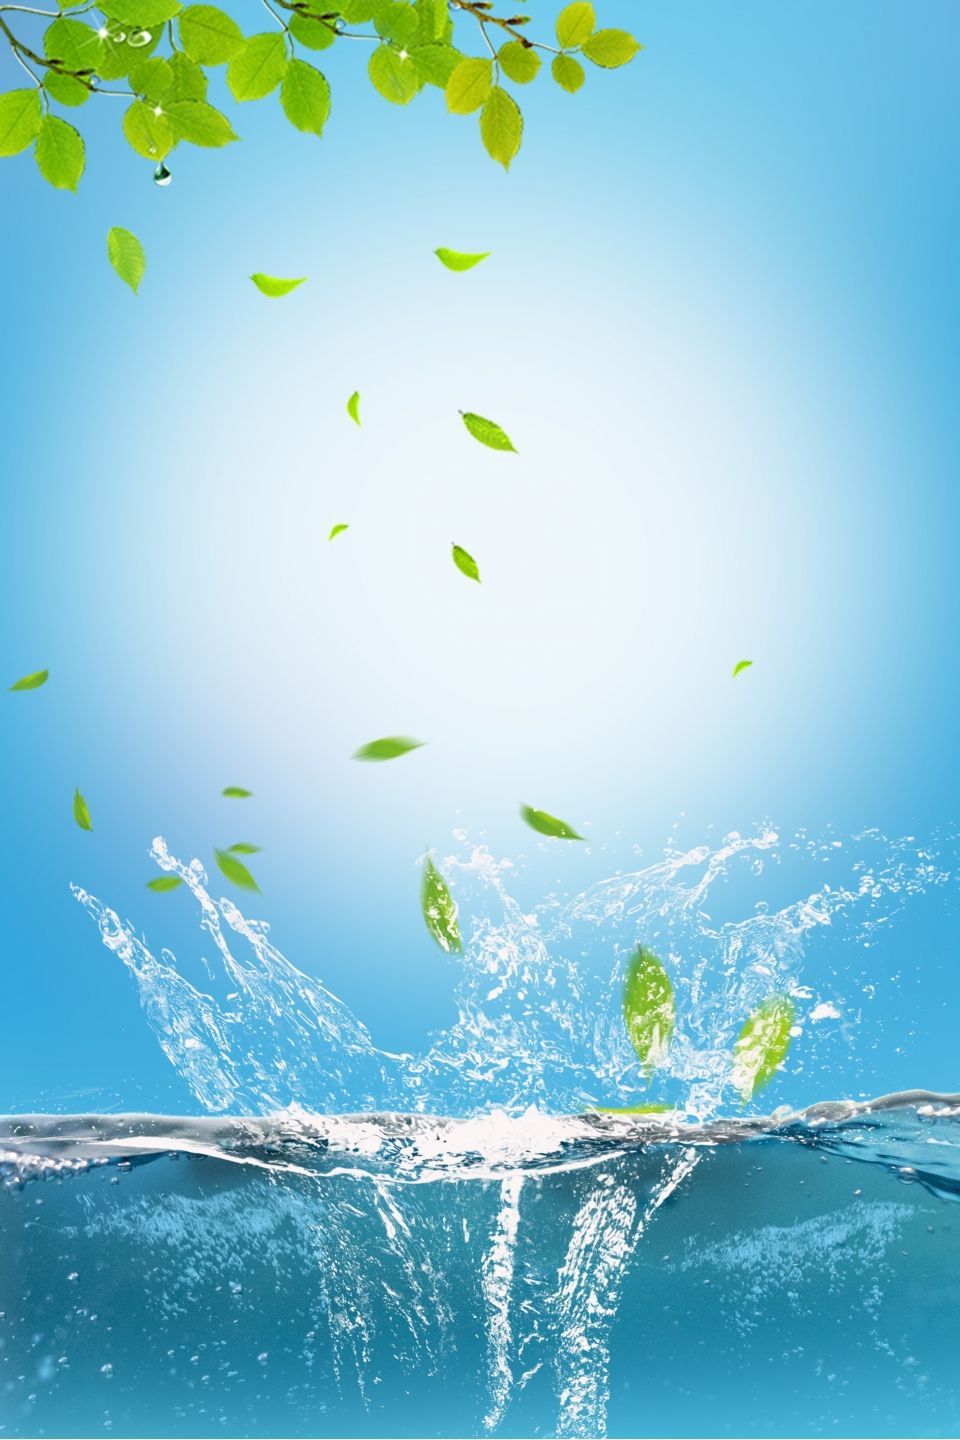 Blue Splash Effect Dry Cleaners Advertising Poster Background Material. Water poster, Background image, Background design